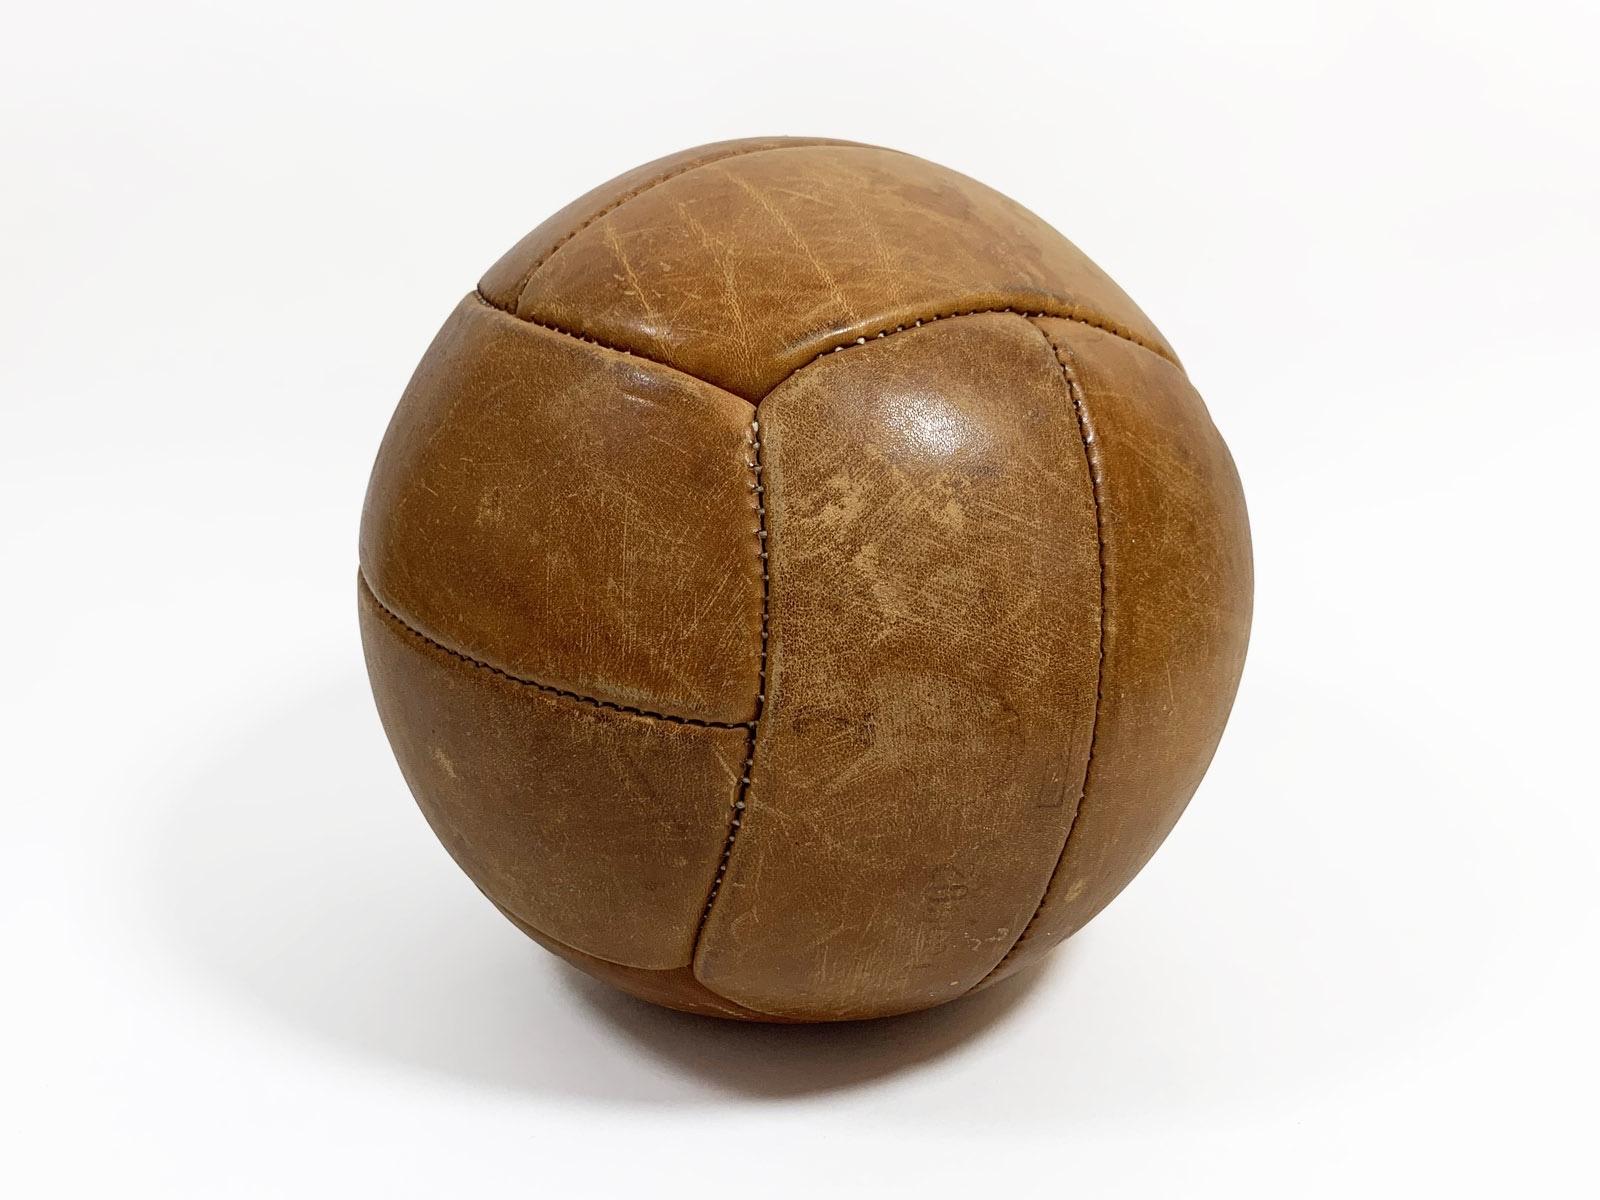 Vintage leather gym ball produced in former Czechoslovakia by Gala, 1930s.
Lots of patina!